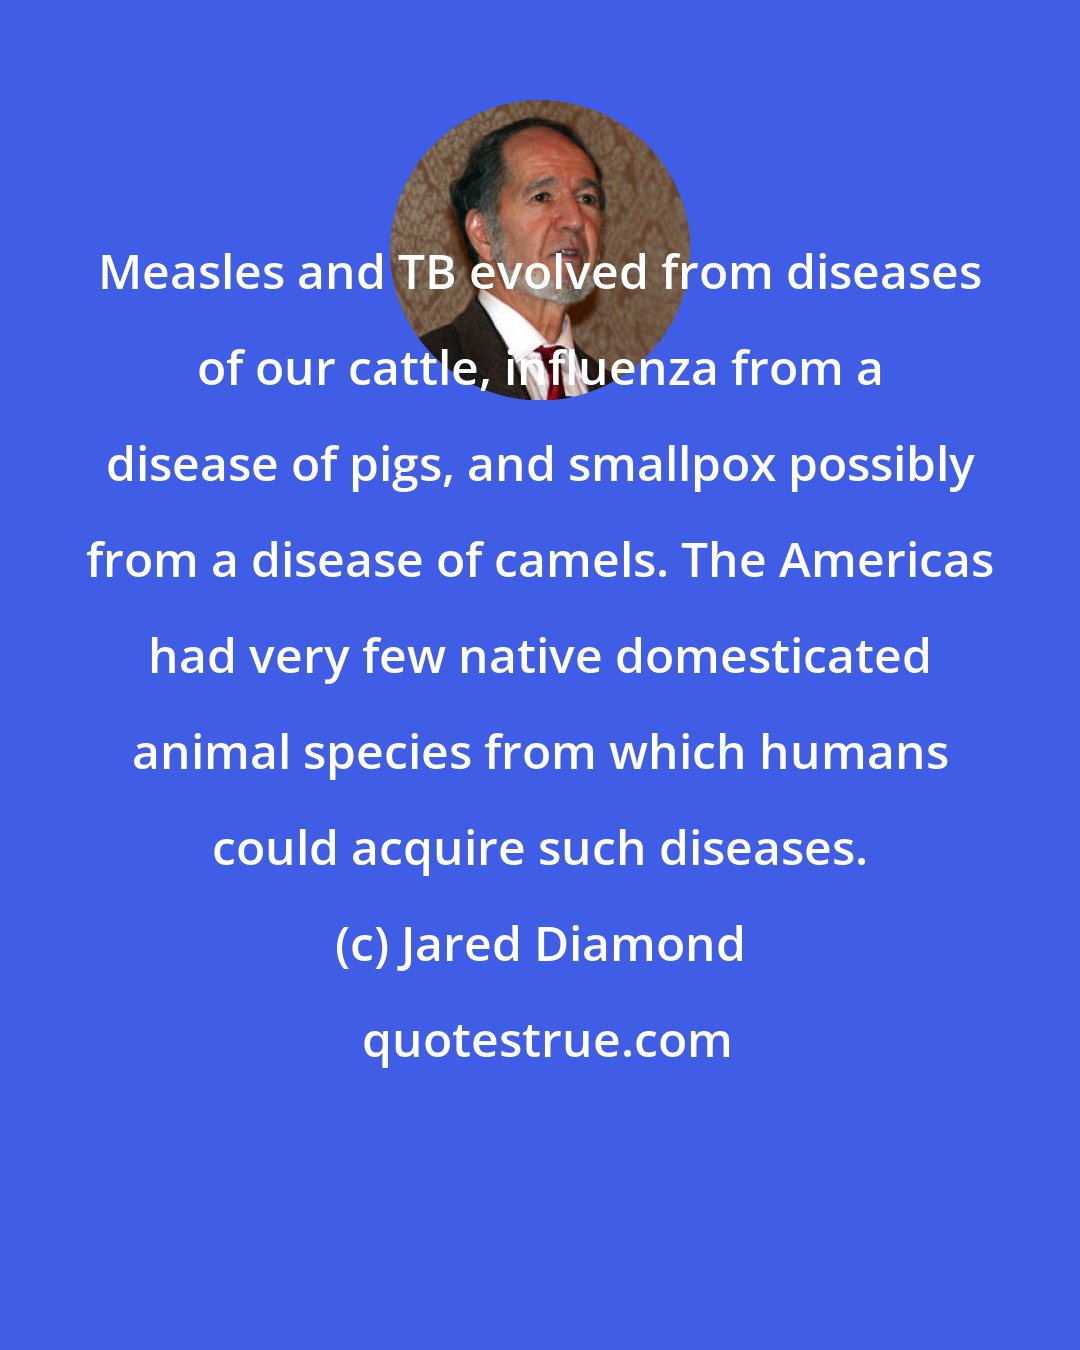 Jared Diamond: Measles and TB evolved from diseases of our cattle, influenza from a disease of pigs, and smallpox possibly from a disease of camels. The Americas had very few native domesticated animal species from which humans could acquire such diseases.